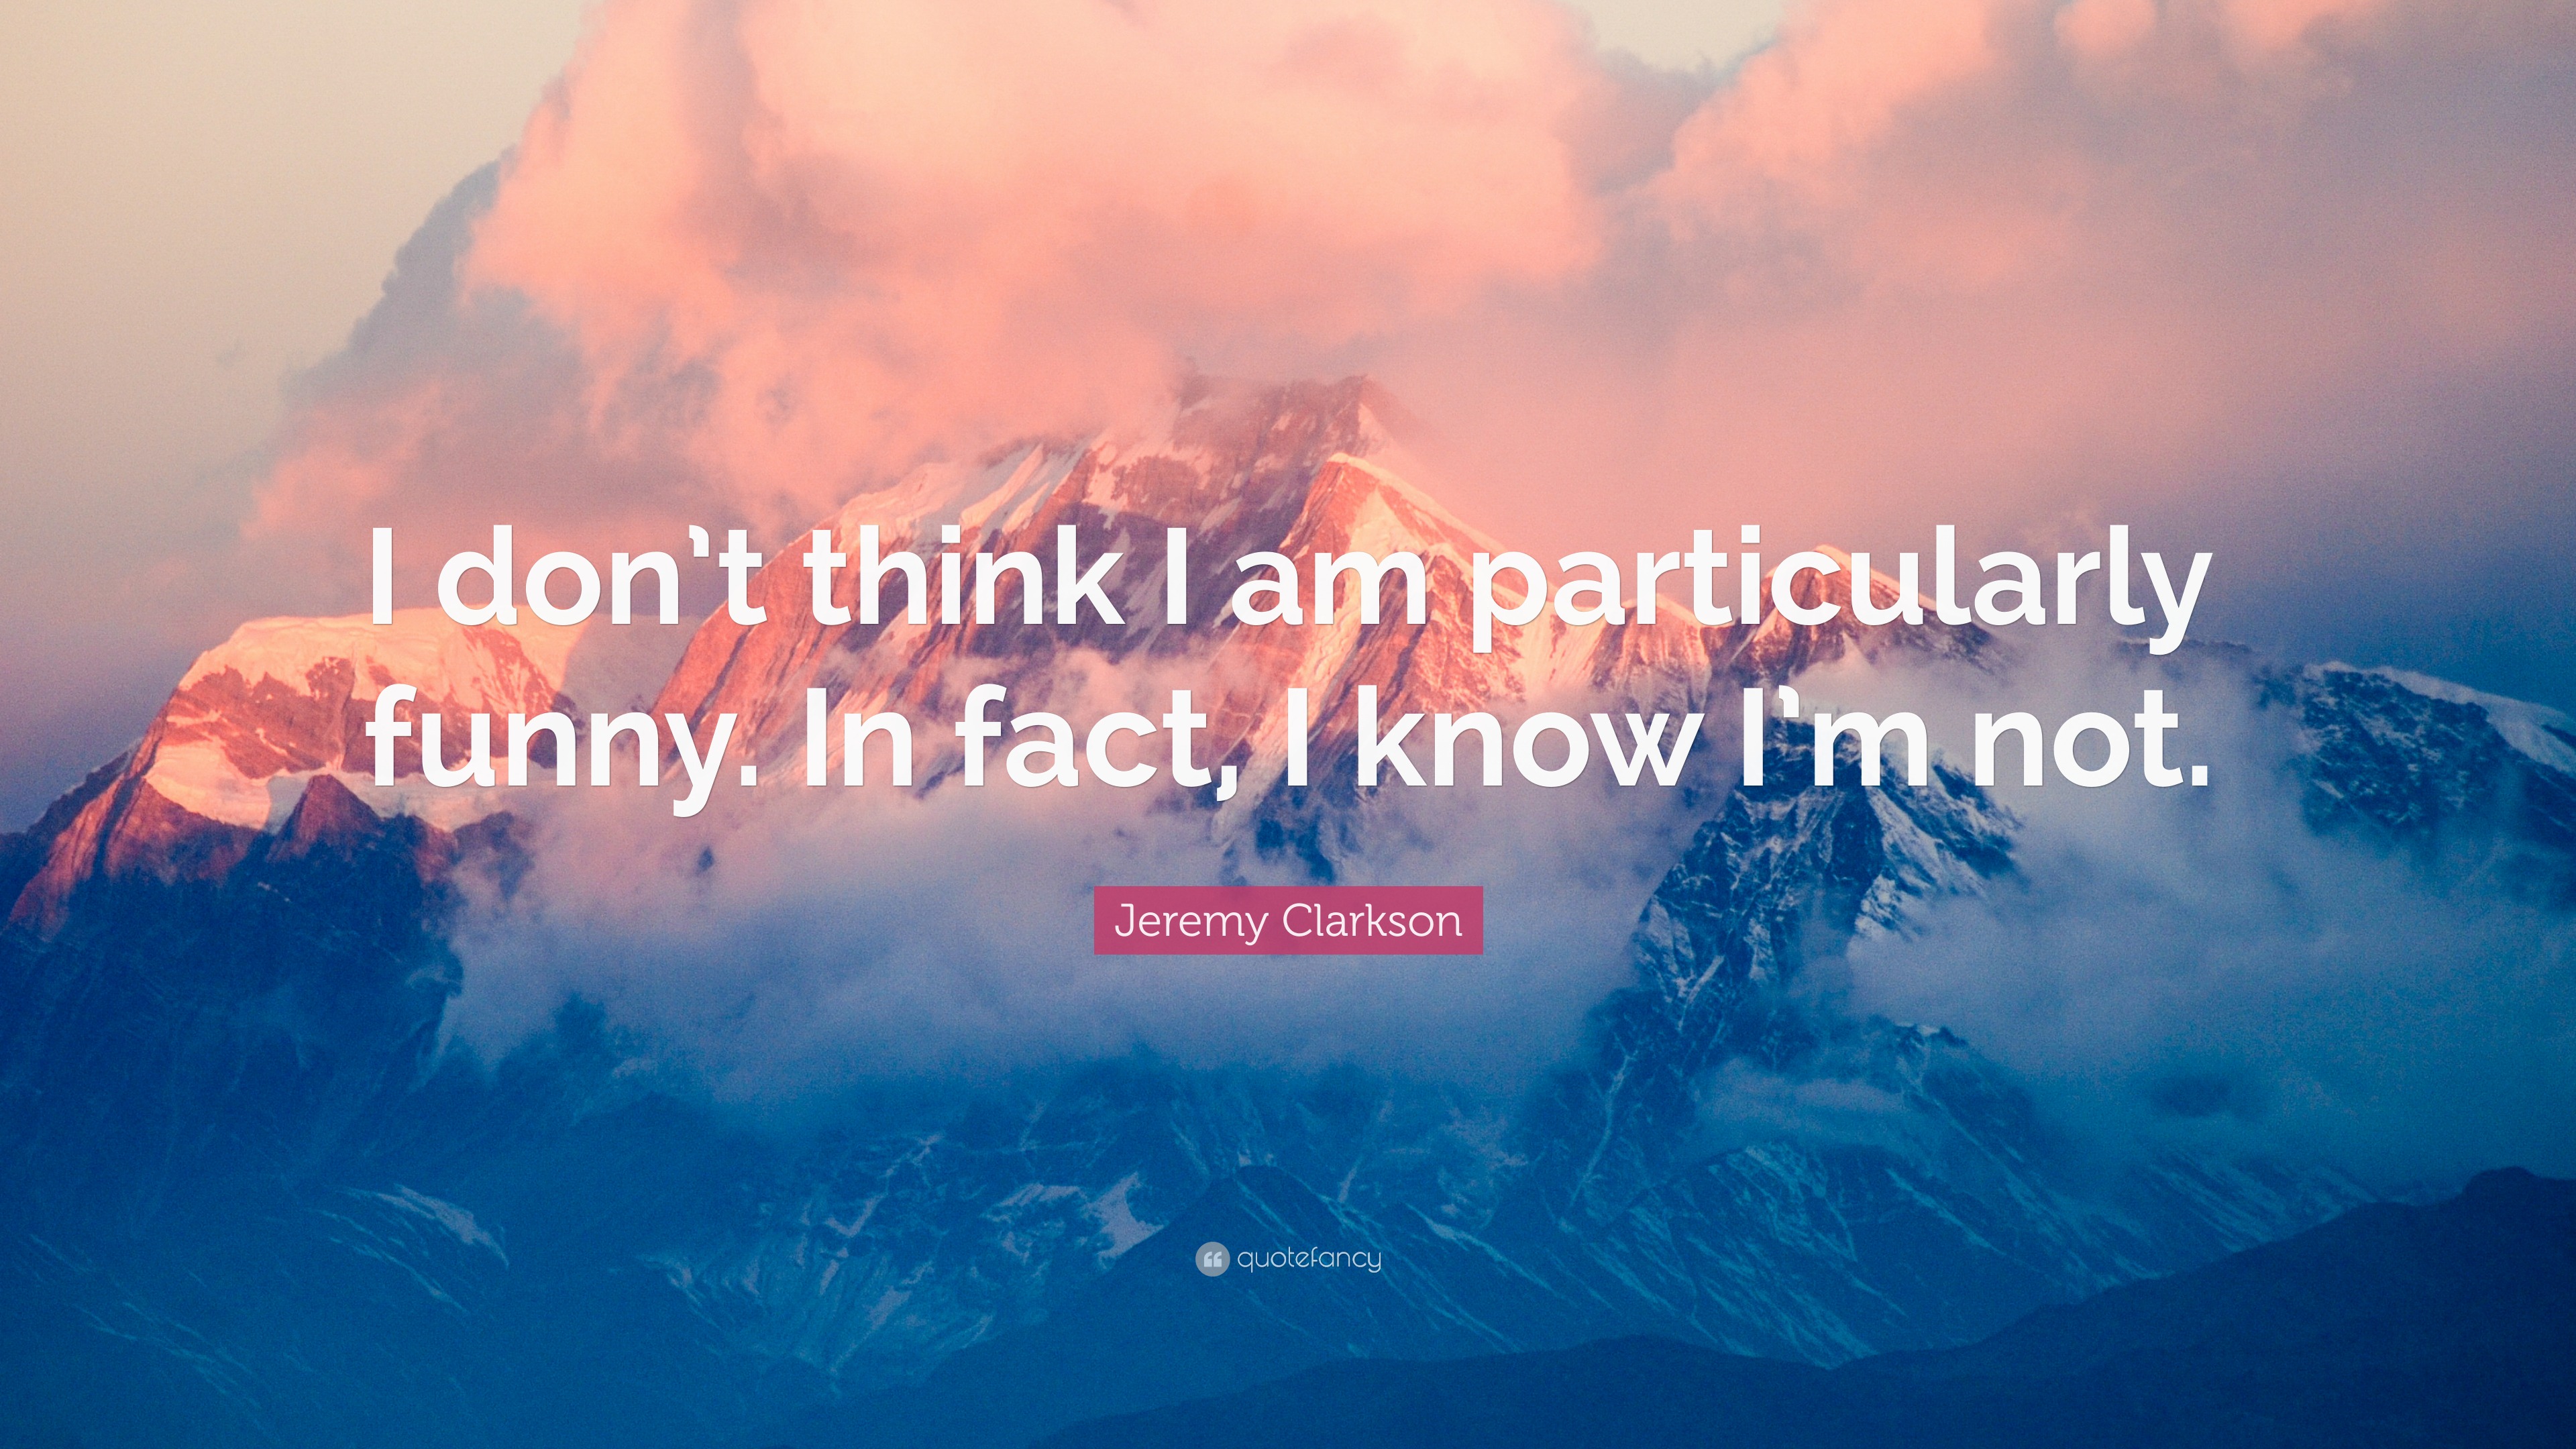 Jeremy Clarkson Quote: “I don't think I am particularly funny. In fact, I  know I'